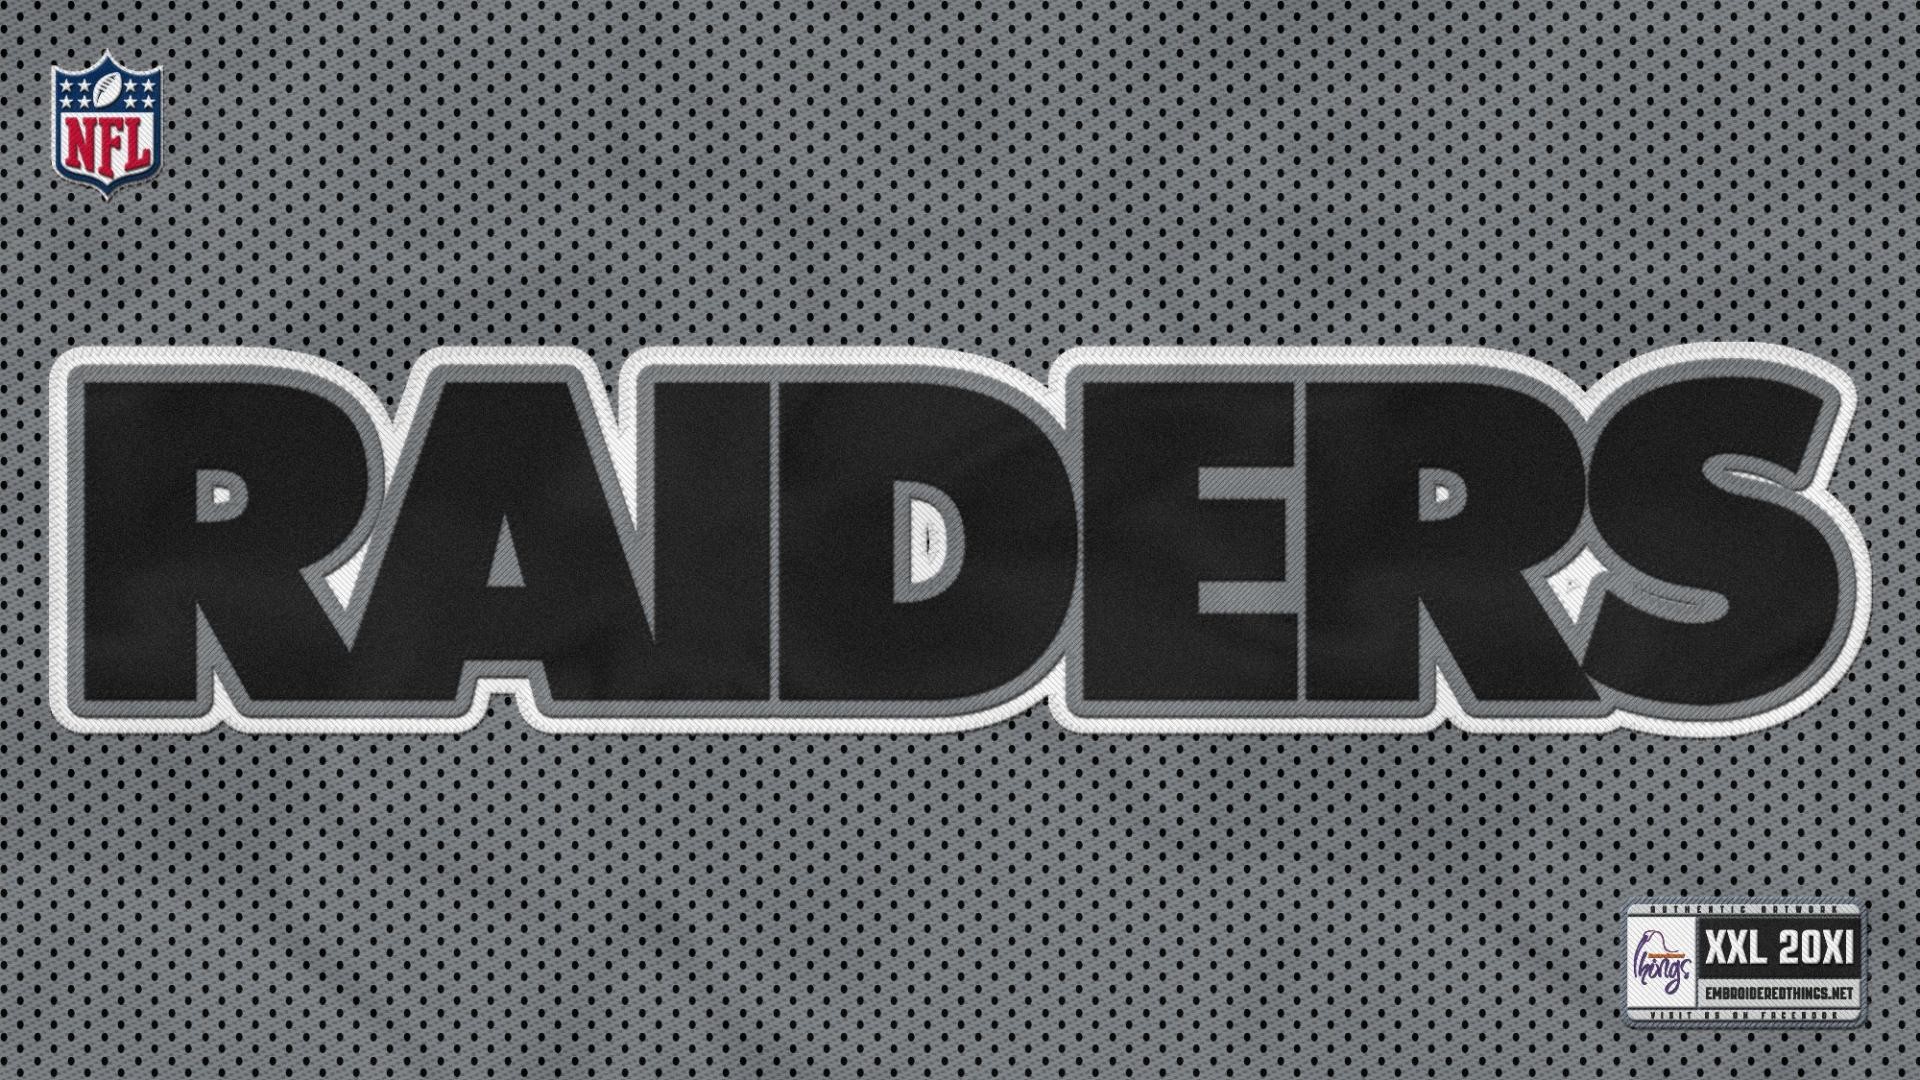 Oakland Raiders Wallpaper HD For Desktop With high-resolution 1920X1080 pixel. Download and set as wallpaper for Desktop Computer, Apple iPhone X, XS Max, XR, 8, 7, 6, SE, iPad, Android